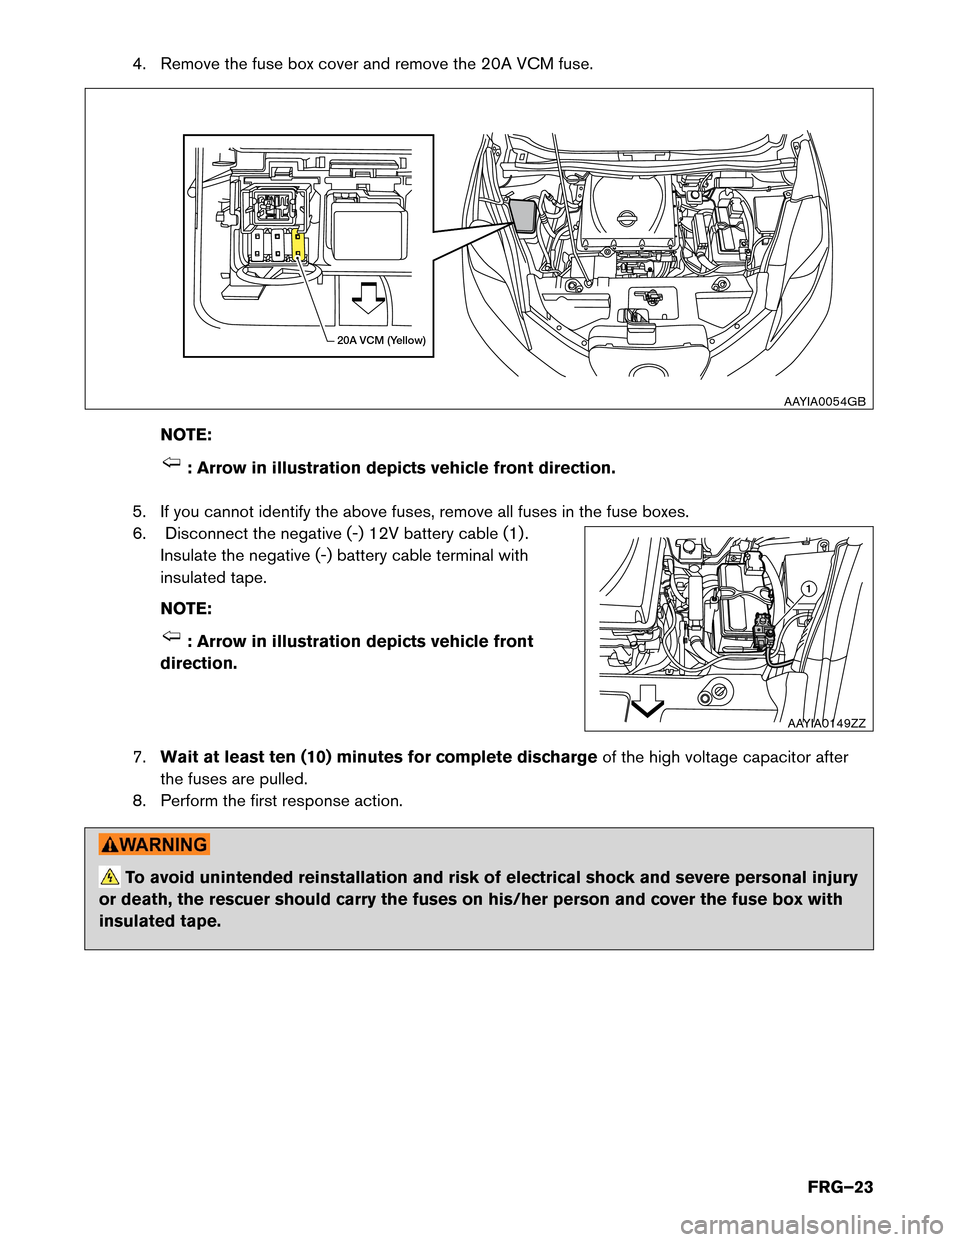 NISSAN LEAF 2014 1.G First Responders Guide 4. Remove the fuse box cover and remove the 20A VCM fuse.
NO TE: : Arrow in illustration depicts vehicle front direction.
5.

If you cannot identify the above fuses, remove all fuses in the fuse boxes